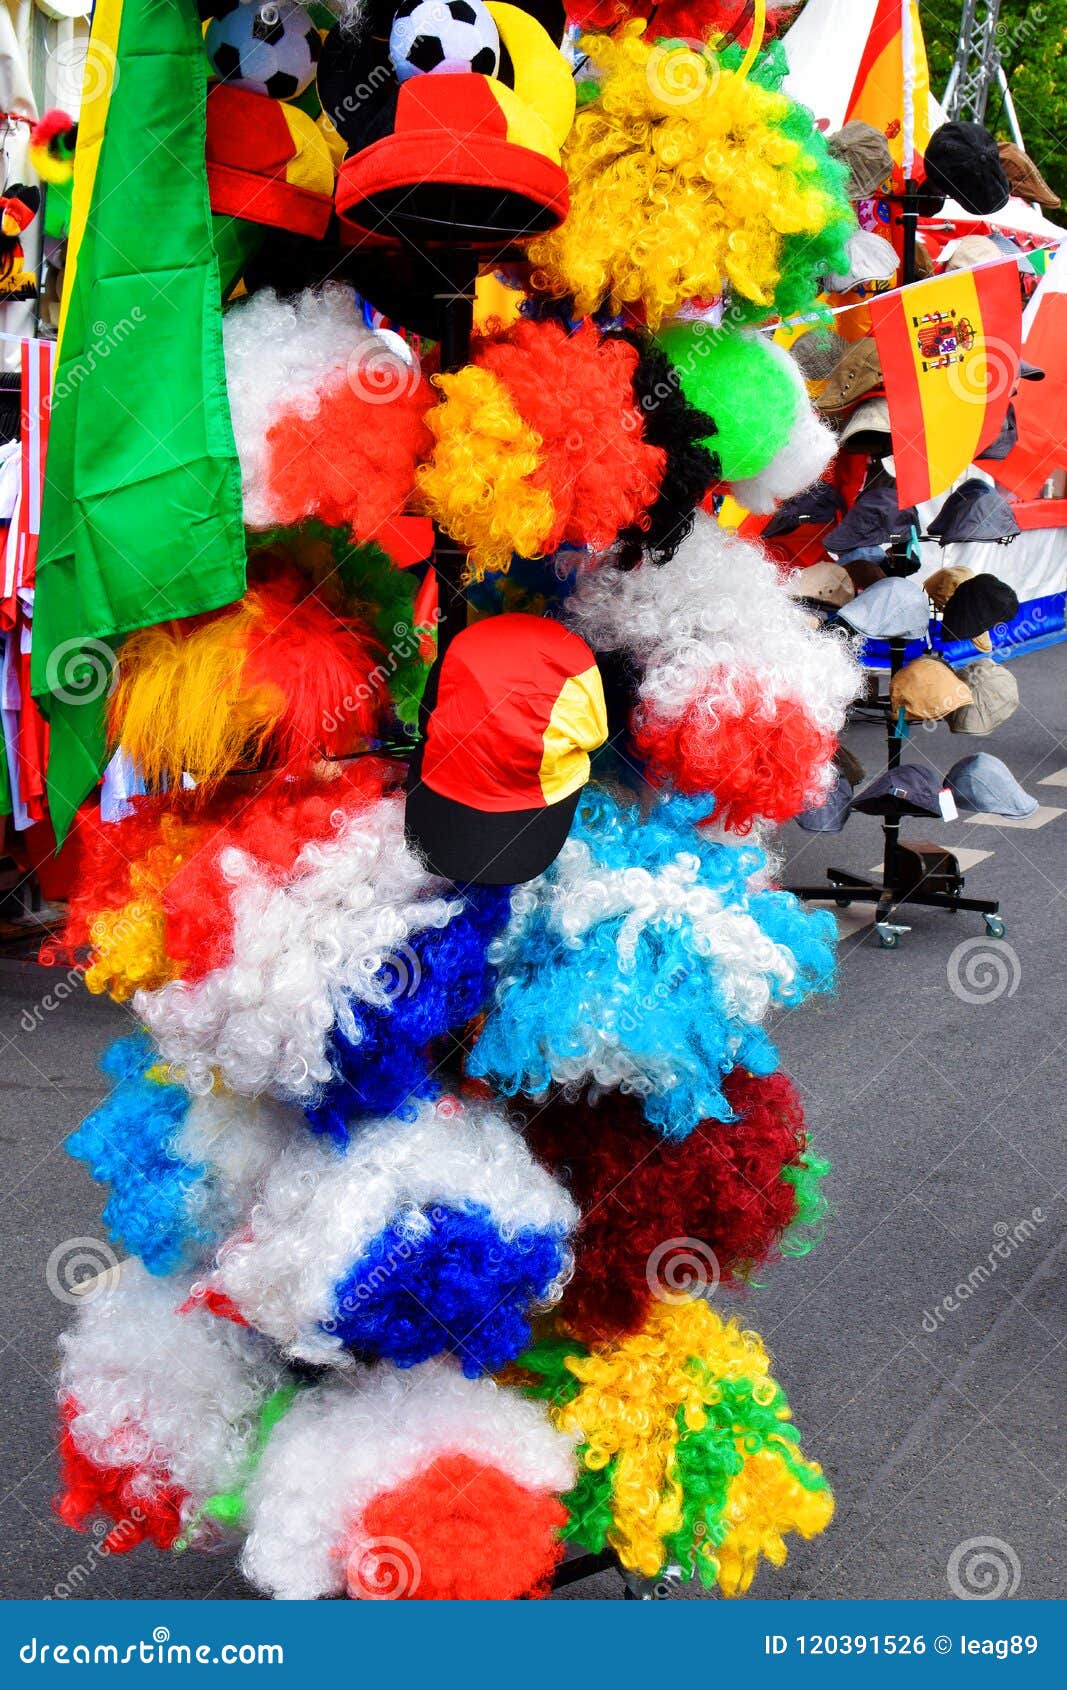 fans accessories stock photo. Image of color - 120391526